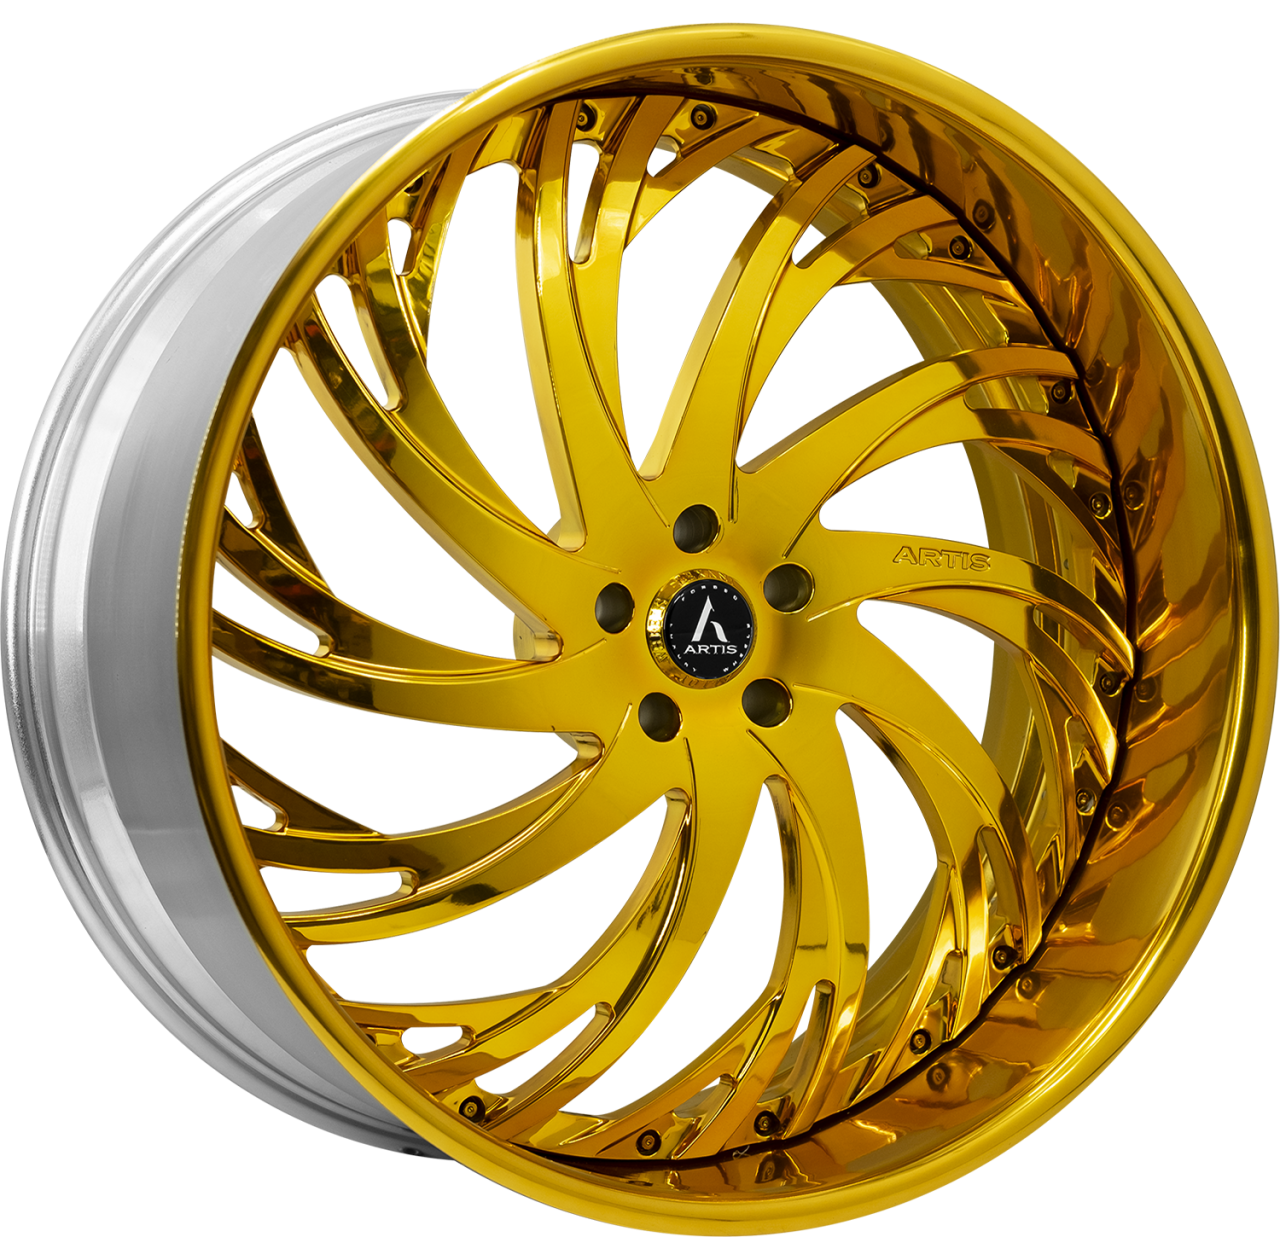 Artis Forged Decatur wheel with Custom Gold finish